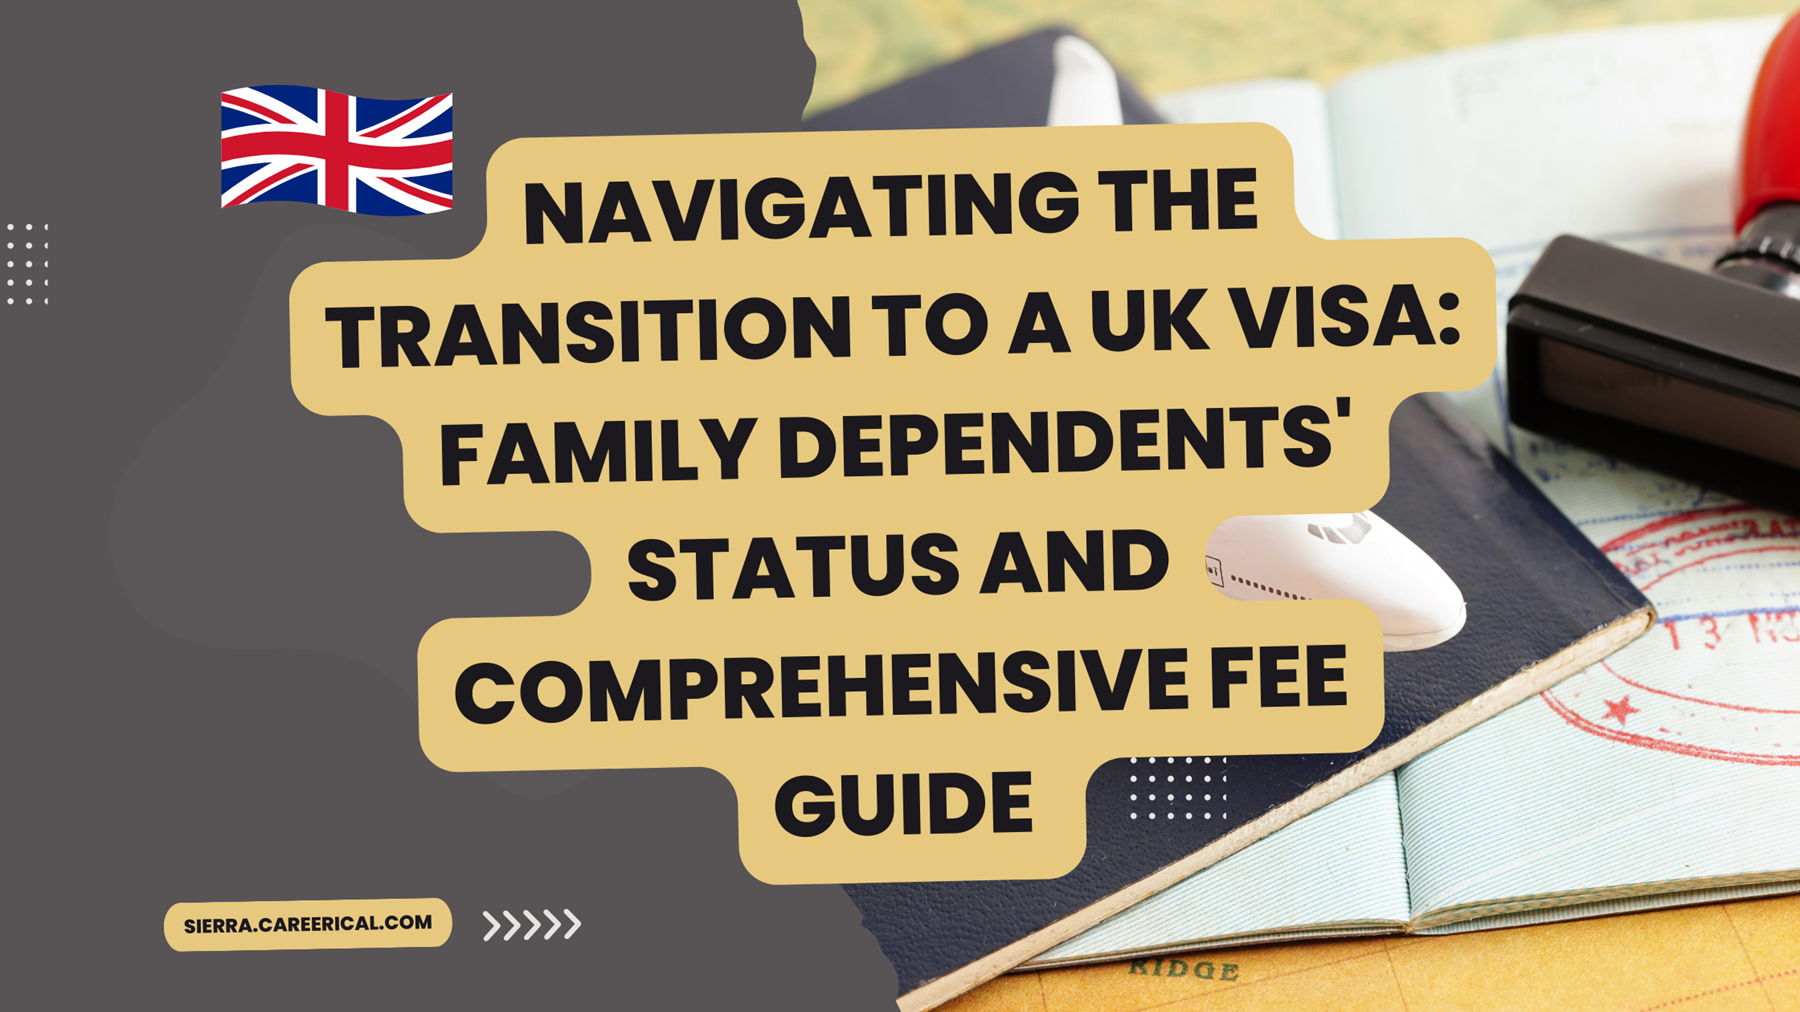 Navigating the Transition to a UK Visa Family Dependents' Status and Comprehensive Fee Guide